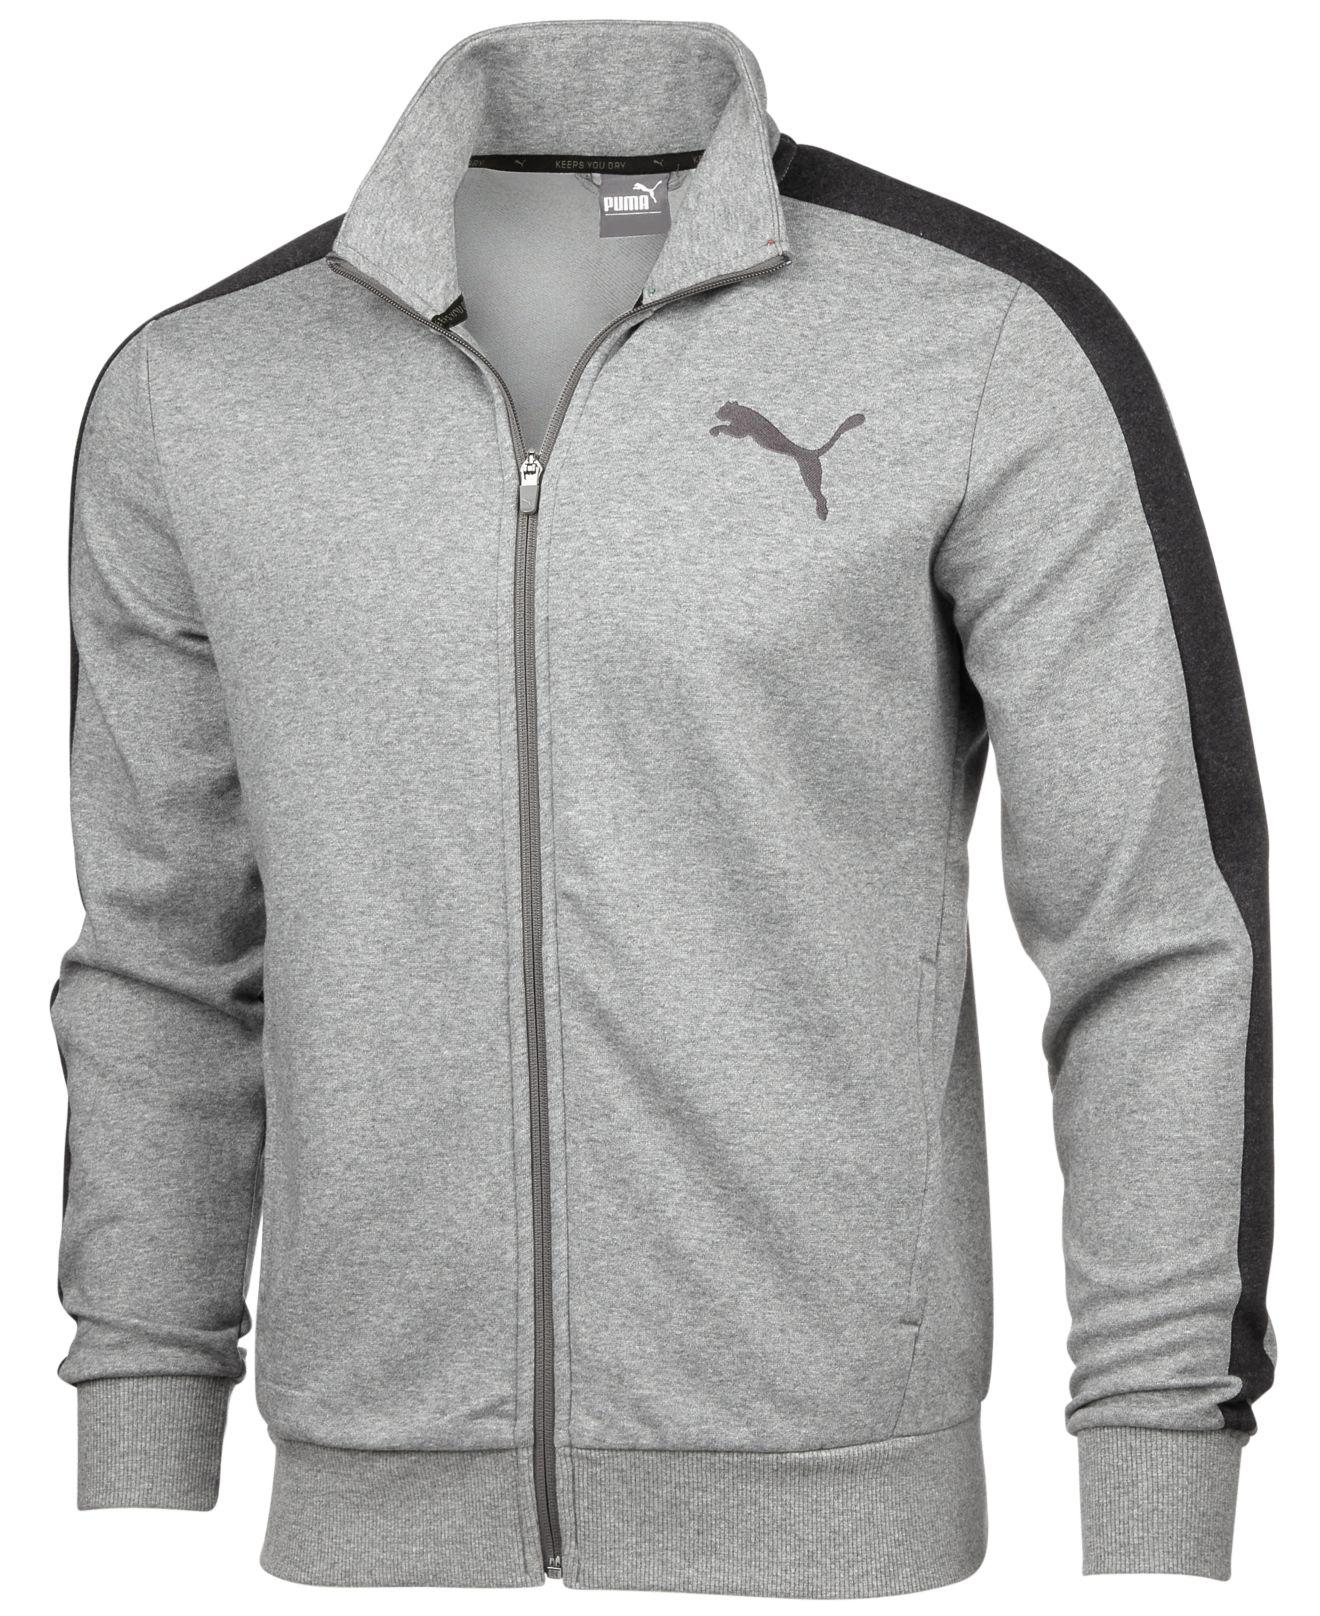 PUMA Cotton Men's Core Track Jacket in Grey (Gray) for Men - Lyst